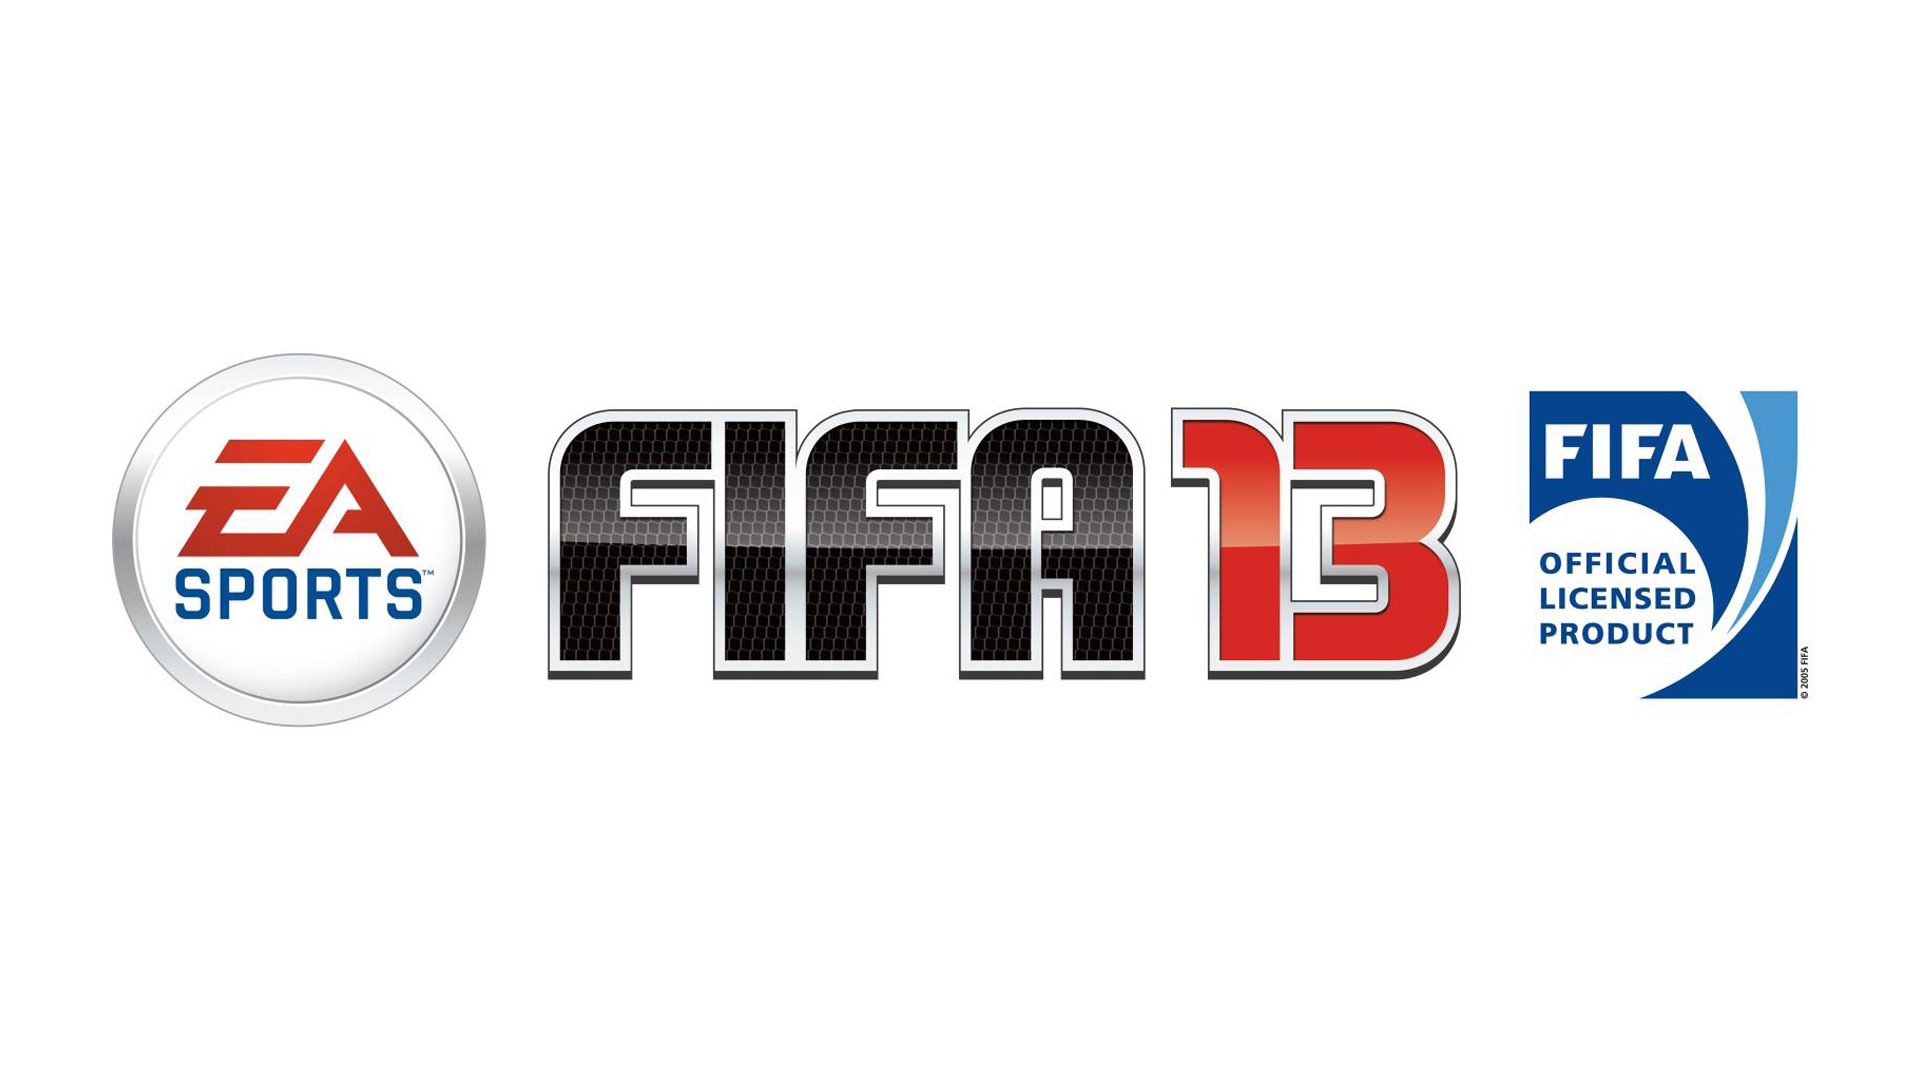 FIFA 13 game HD wallpapers #8 - 1920x1080